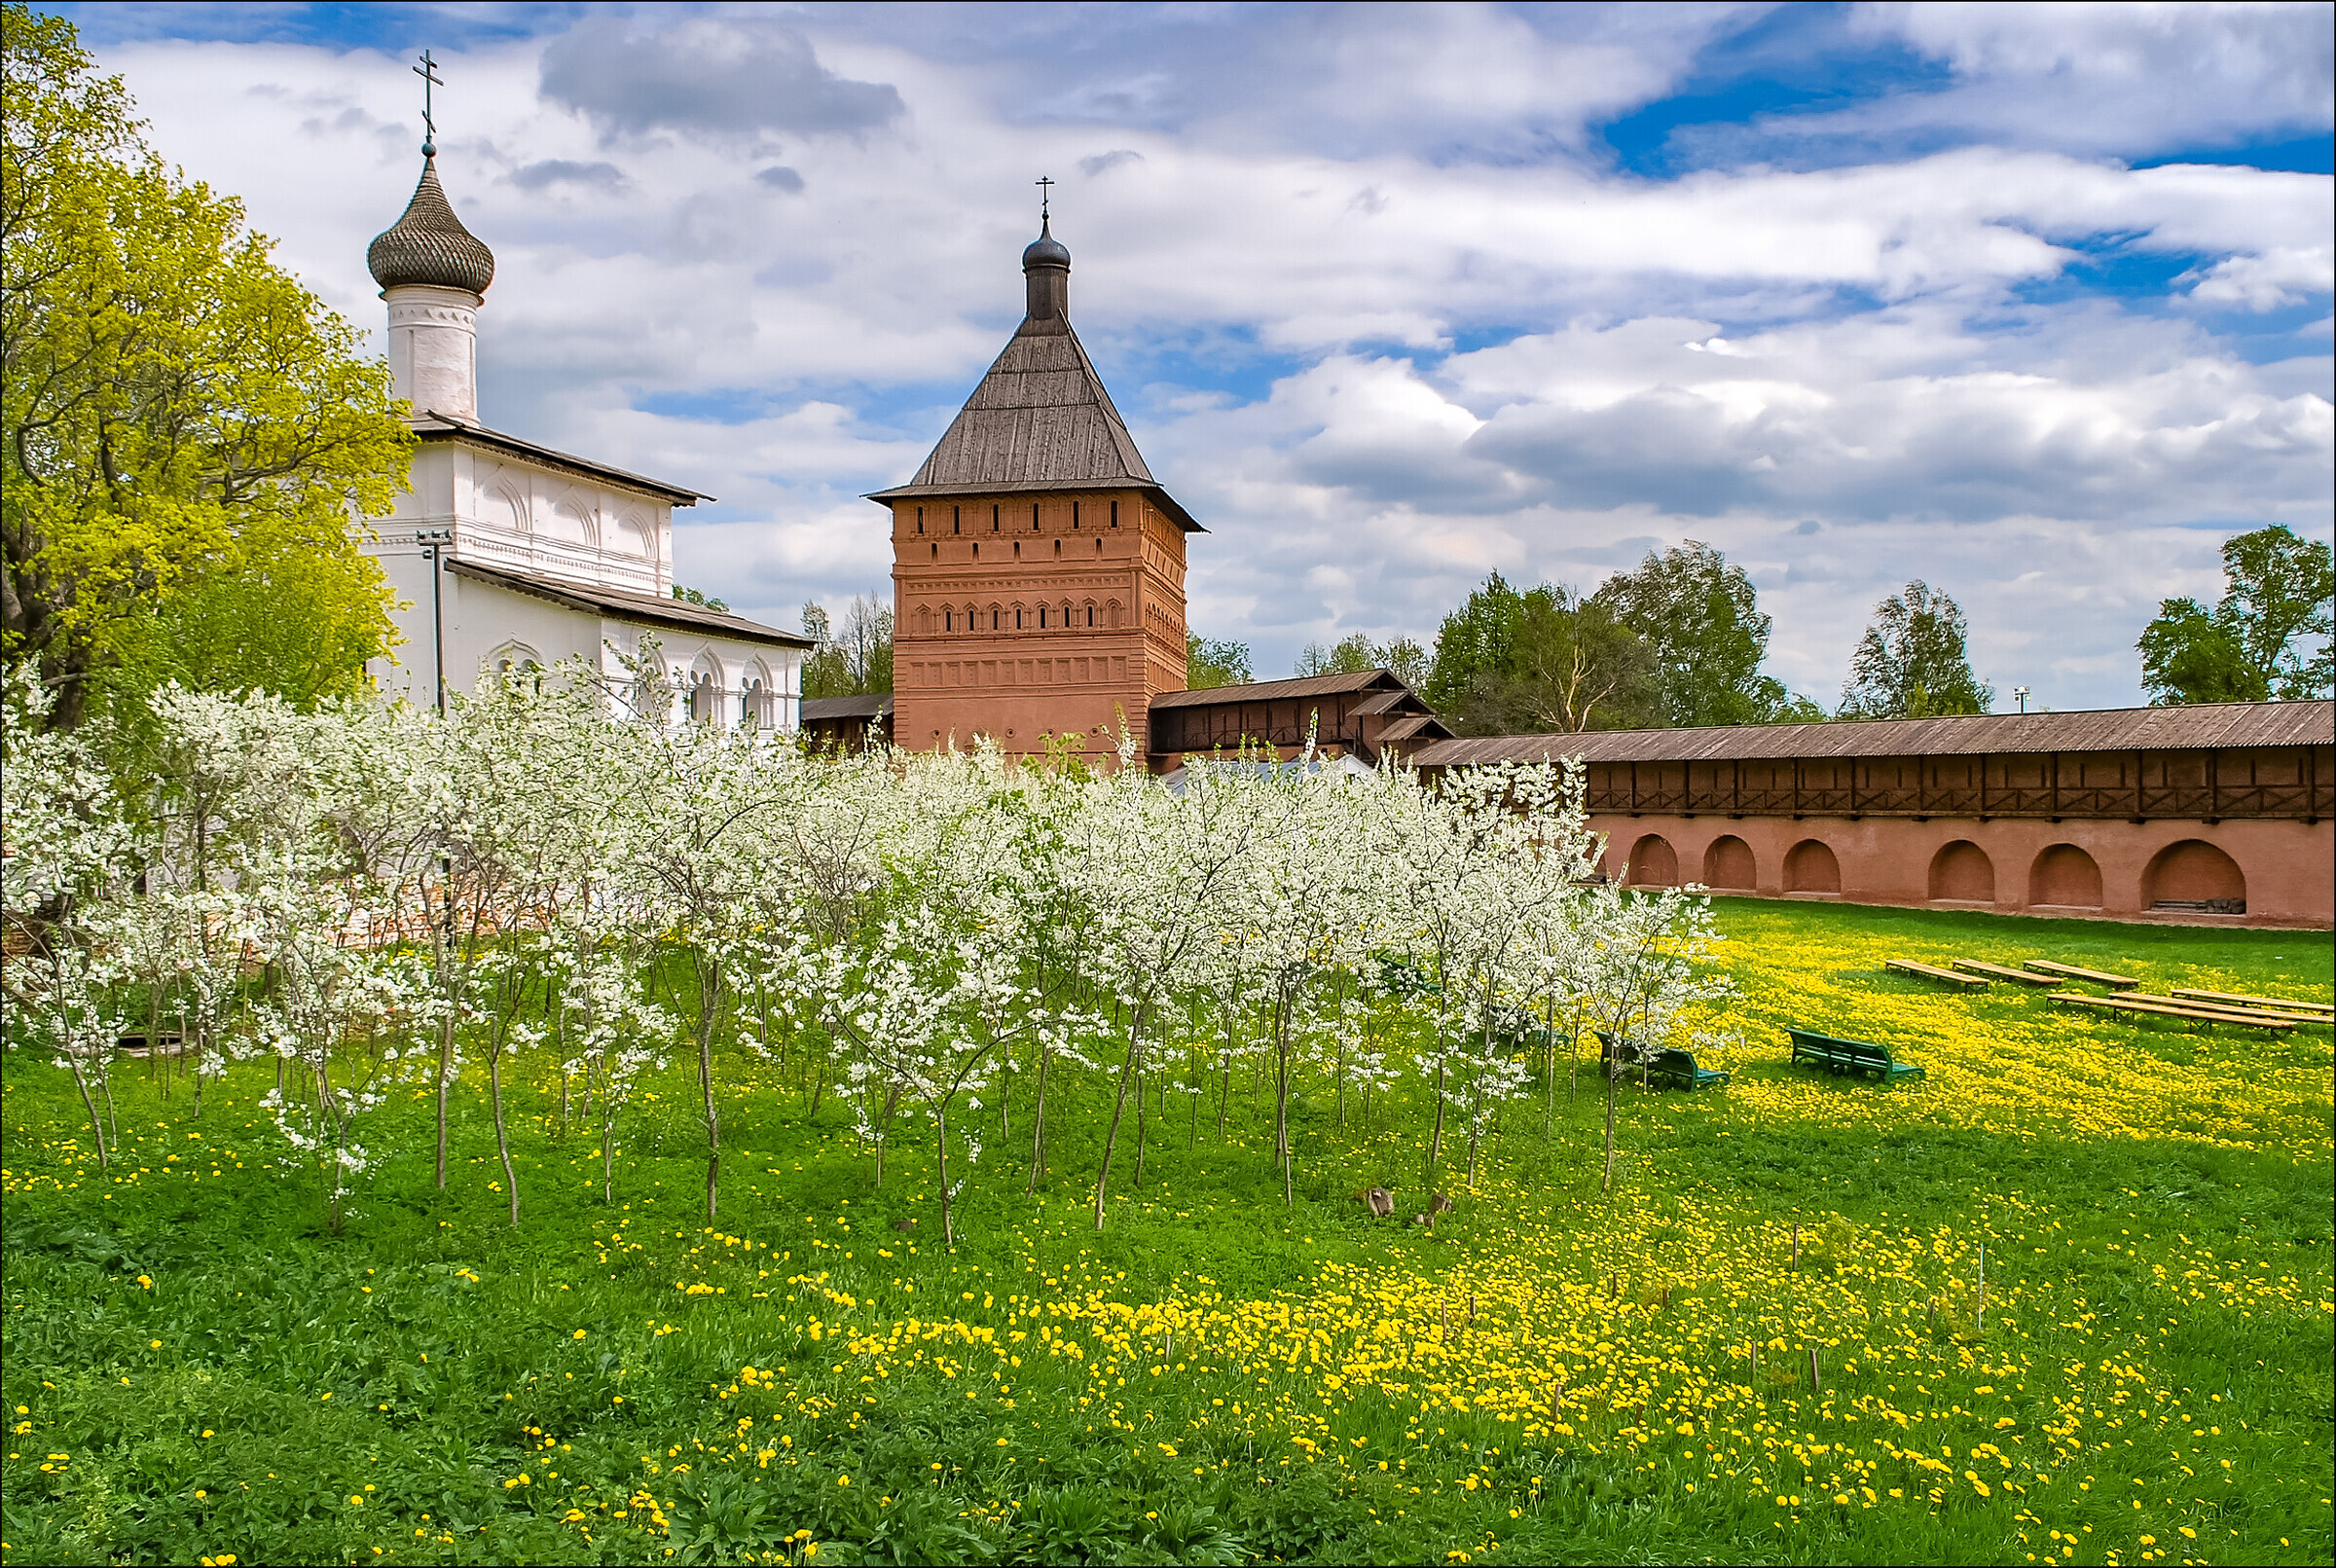 The day of Suzdal 12 August 2017